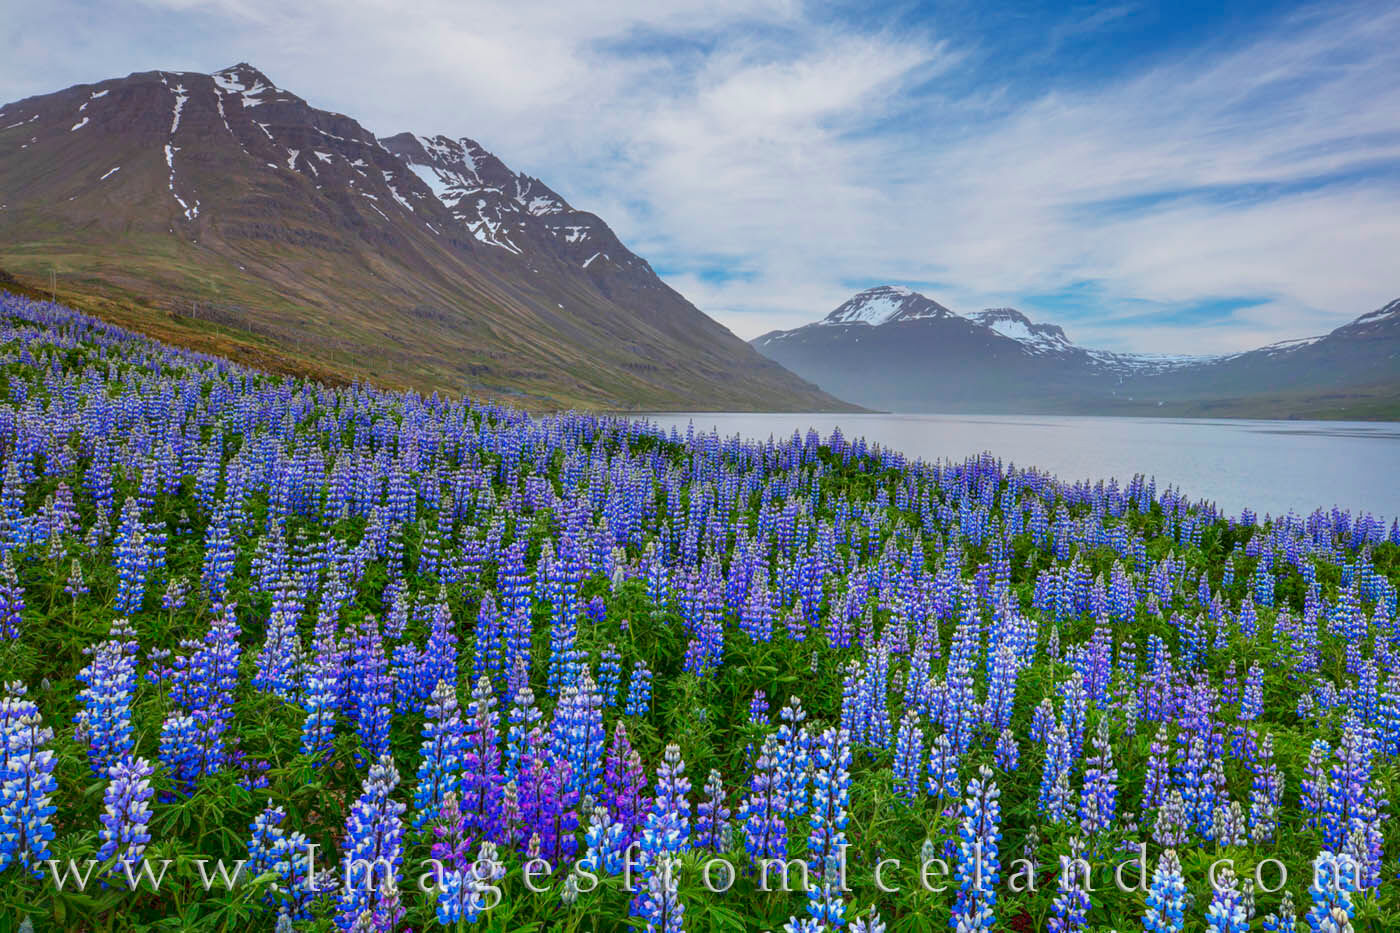 Lupine in the late afternoon show off their blue colors along the slopes of the fjord near Seydisfjördur in east Iceland.